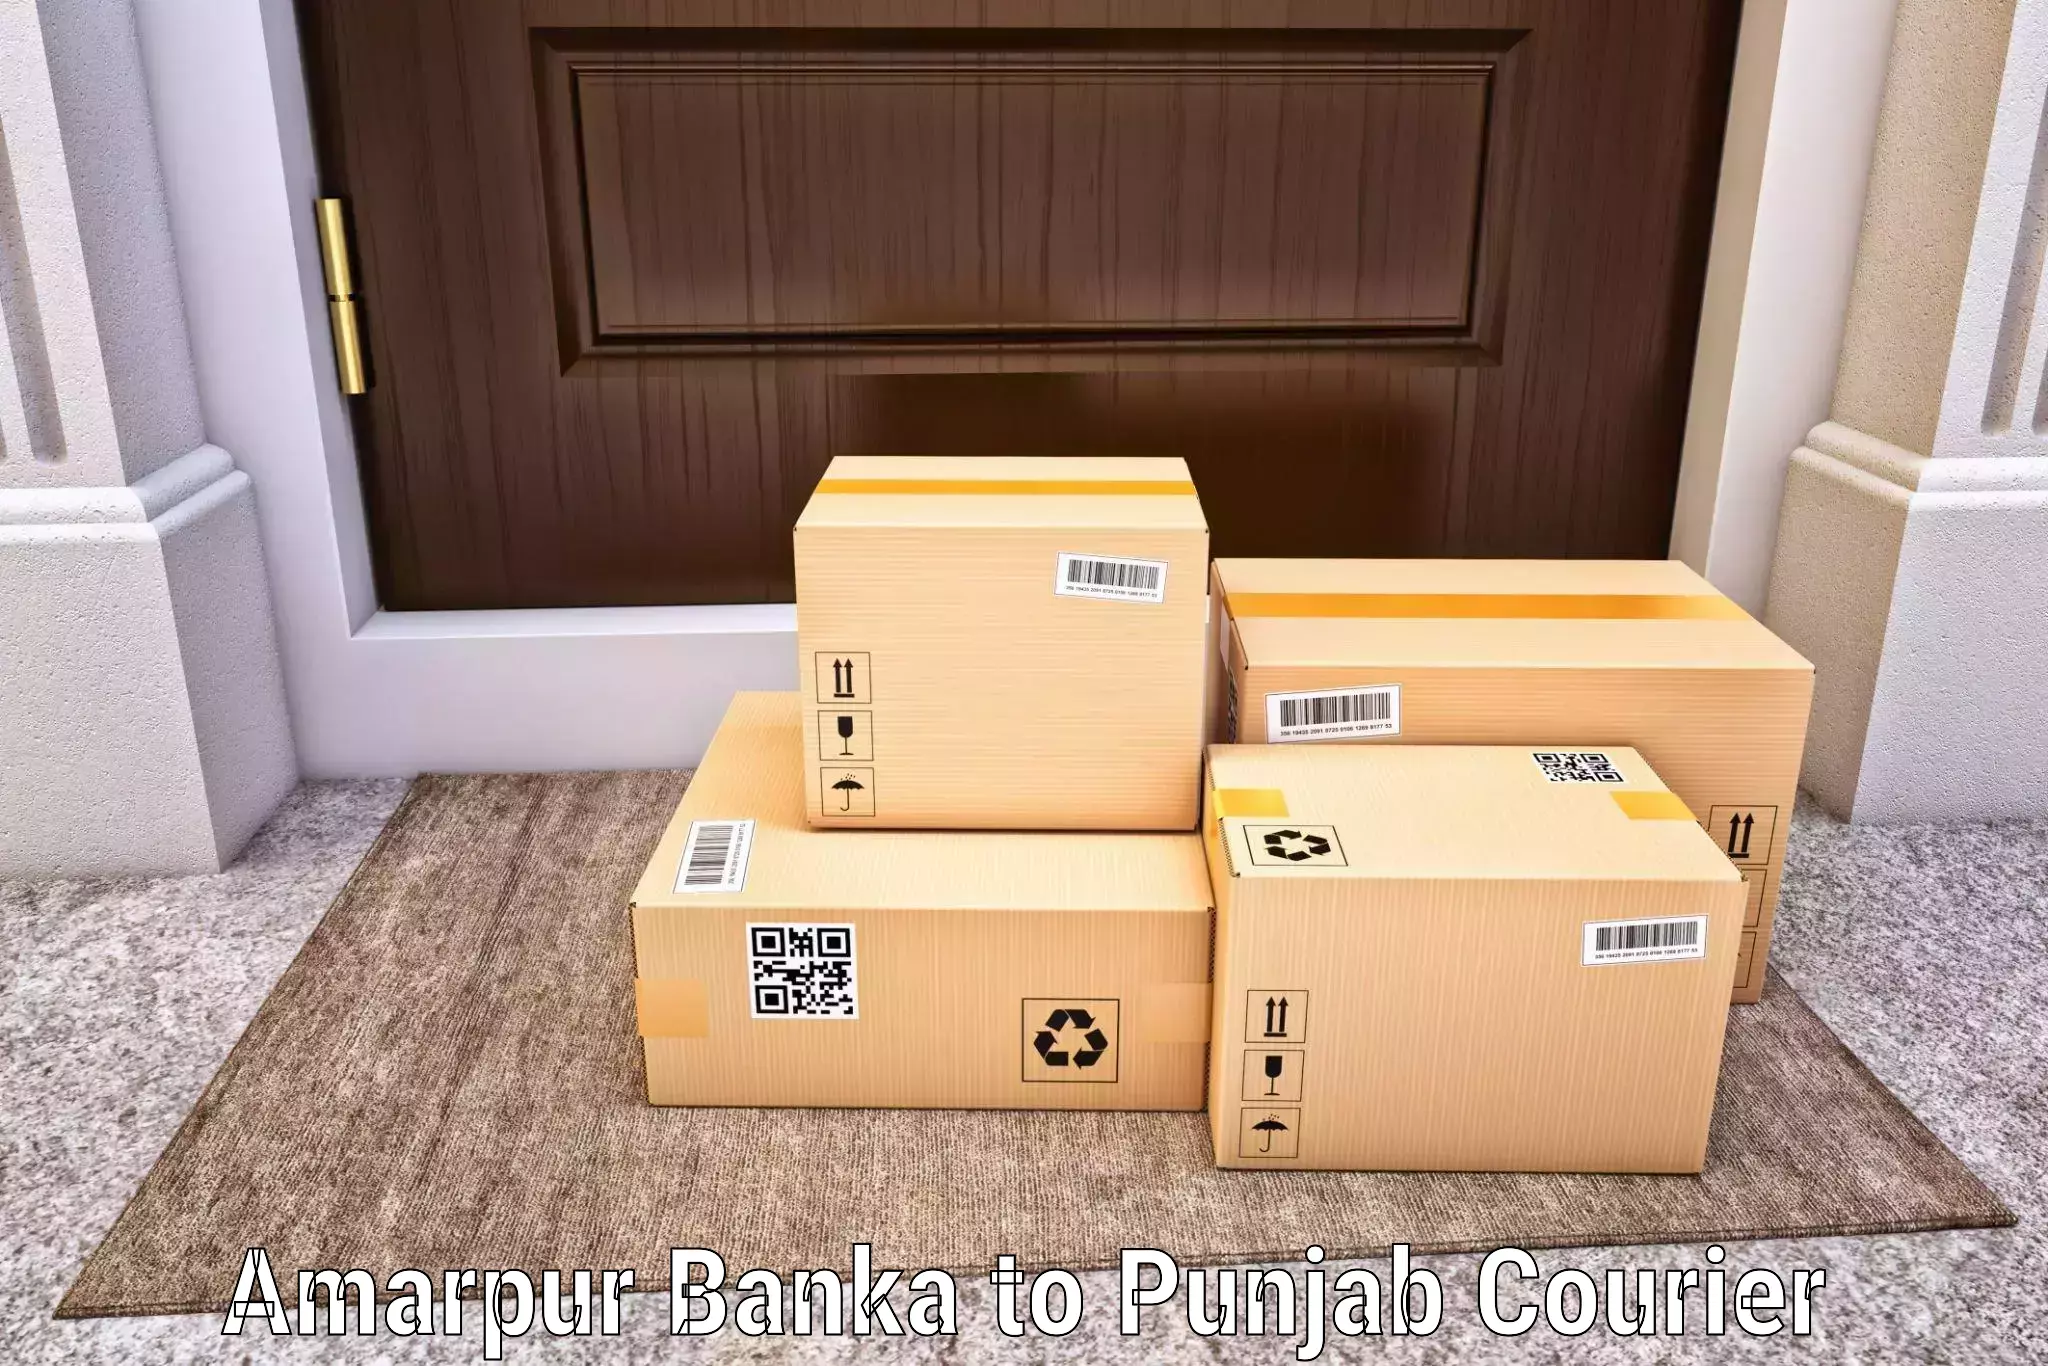 Efficient shipping operations Amarpur Banka to Sultanpur Lodhi